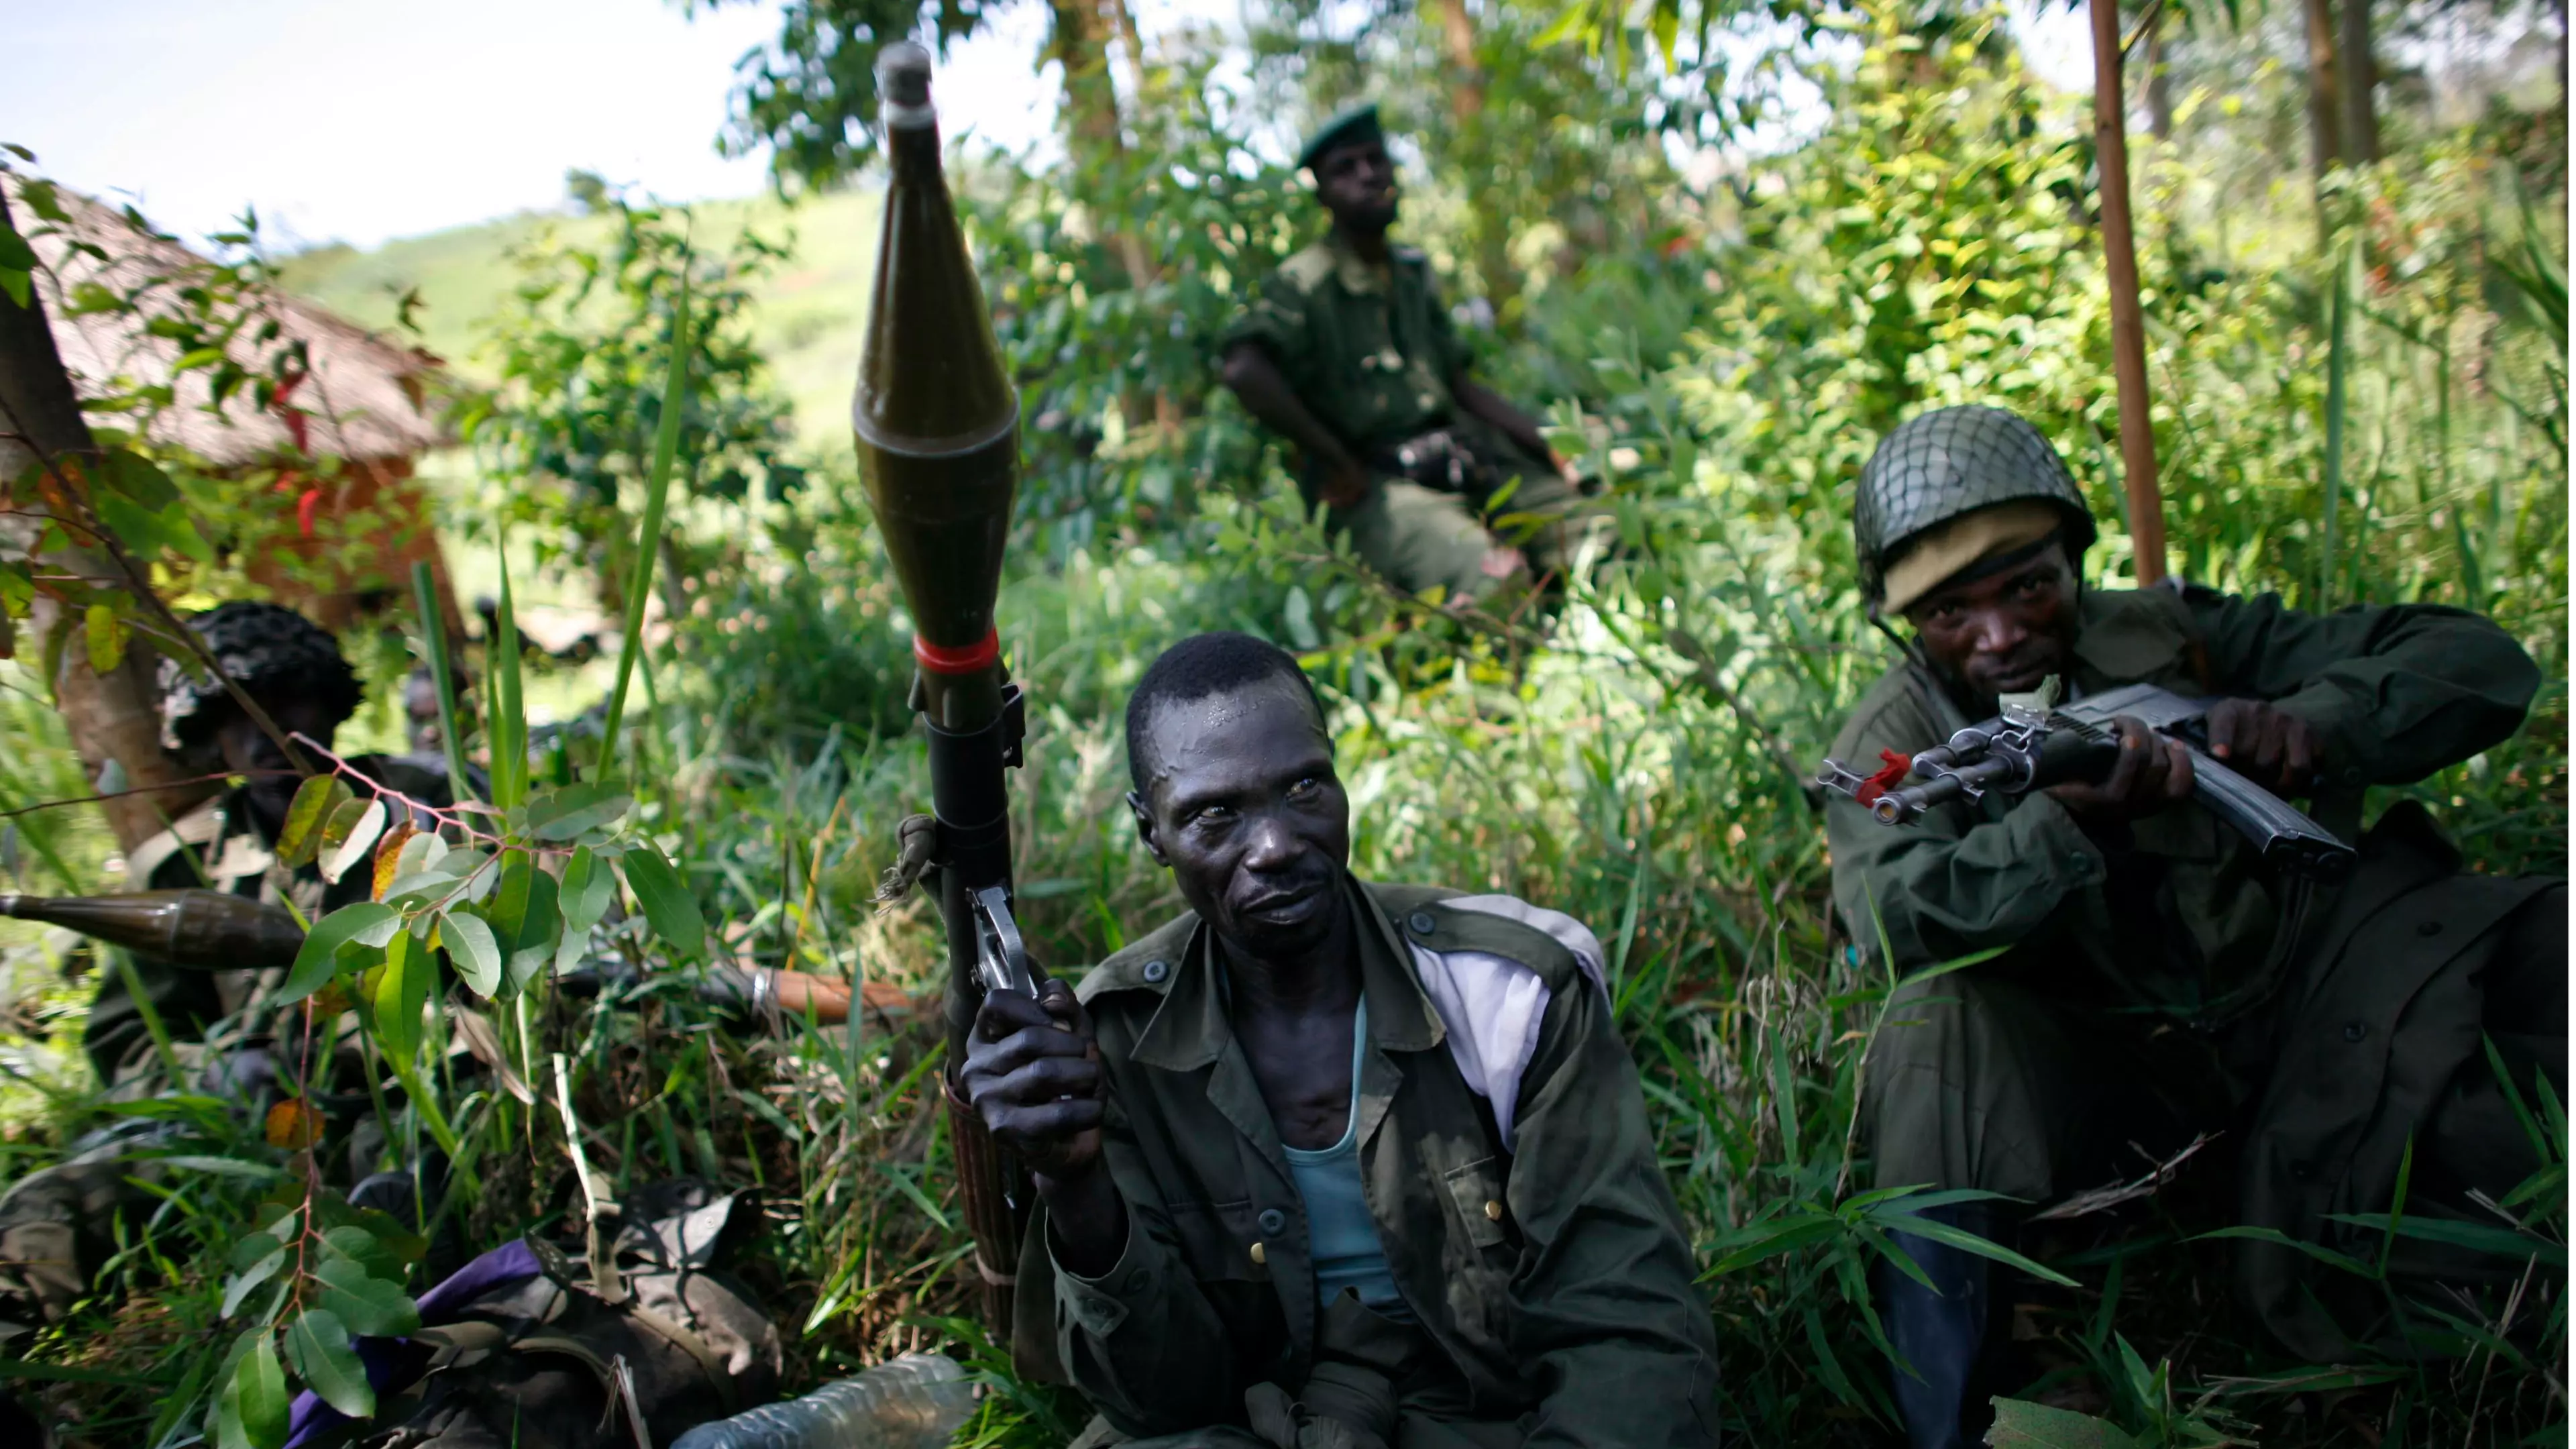 Extreme Stories: Understanding The Conflict In The Democratic Republic Of The Congo